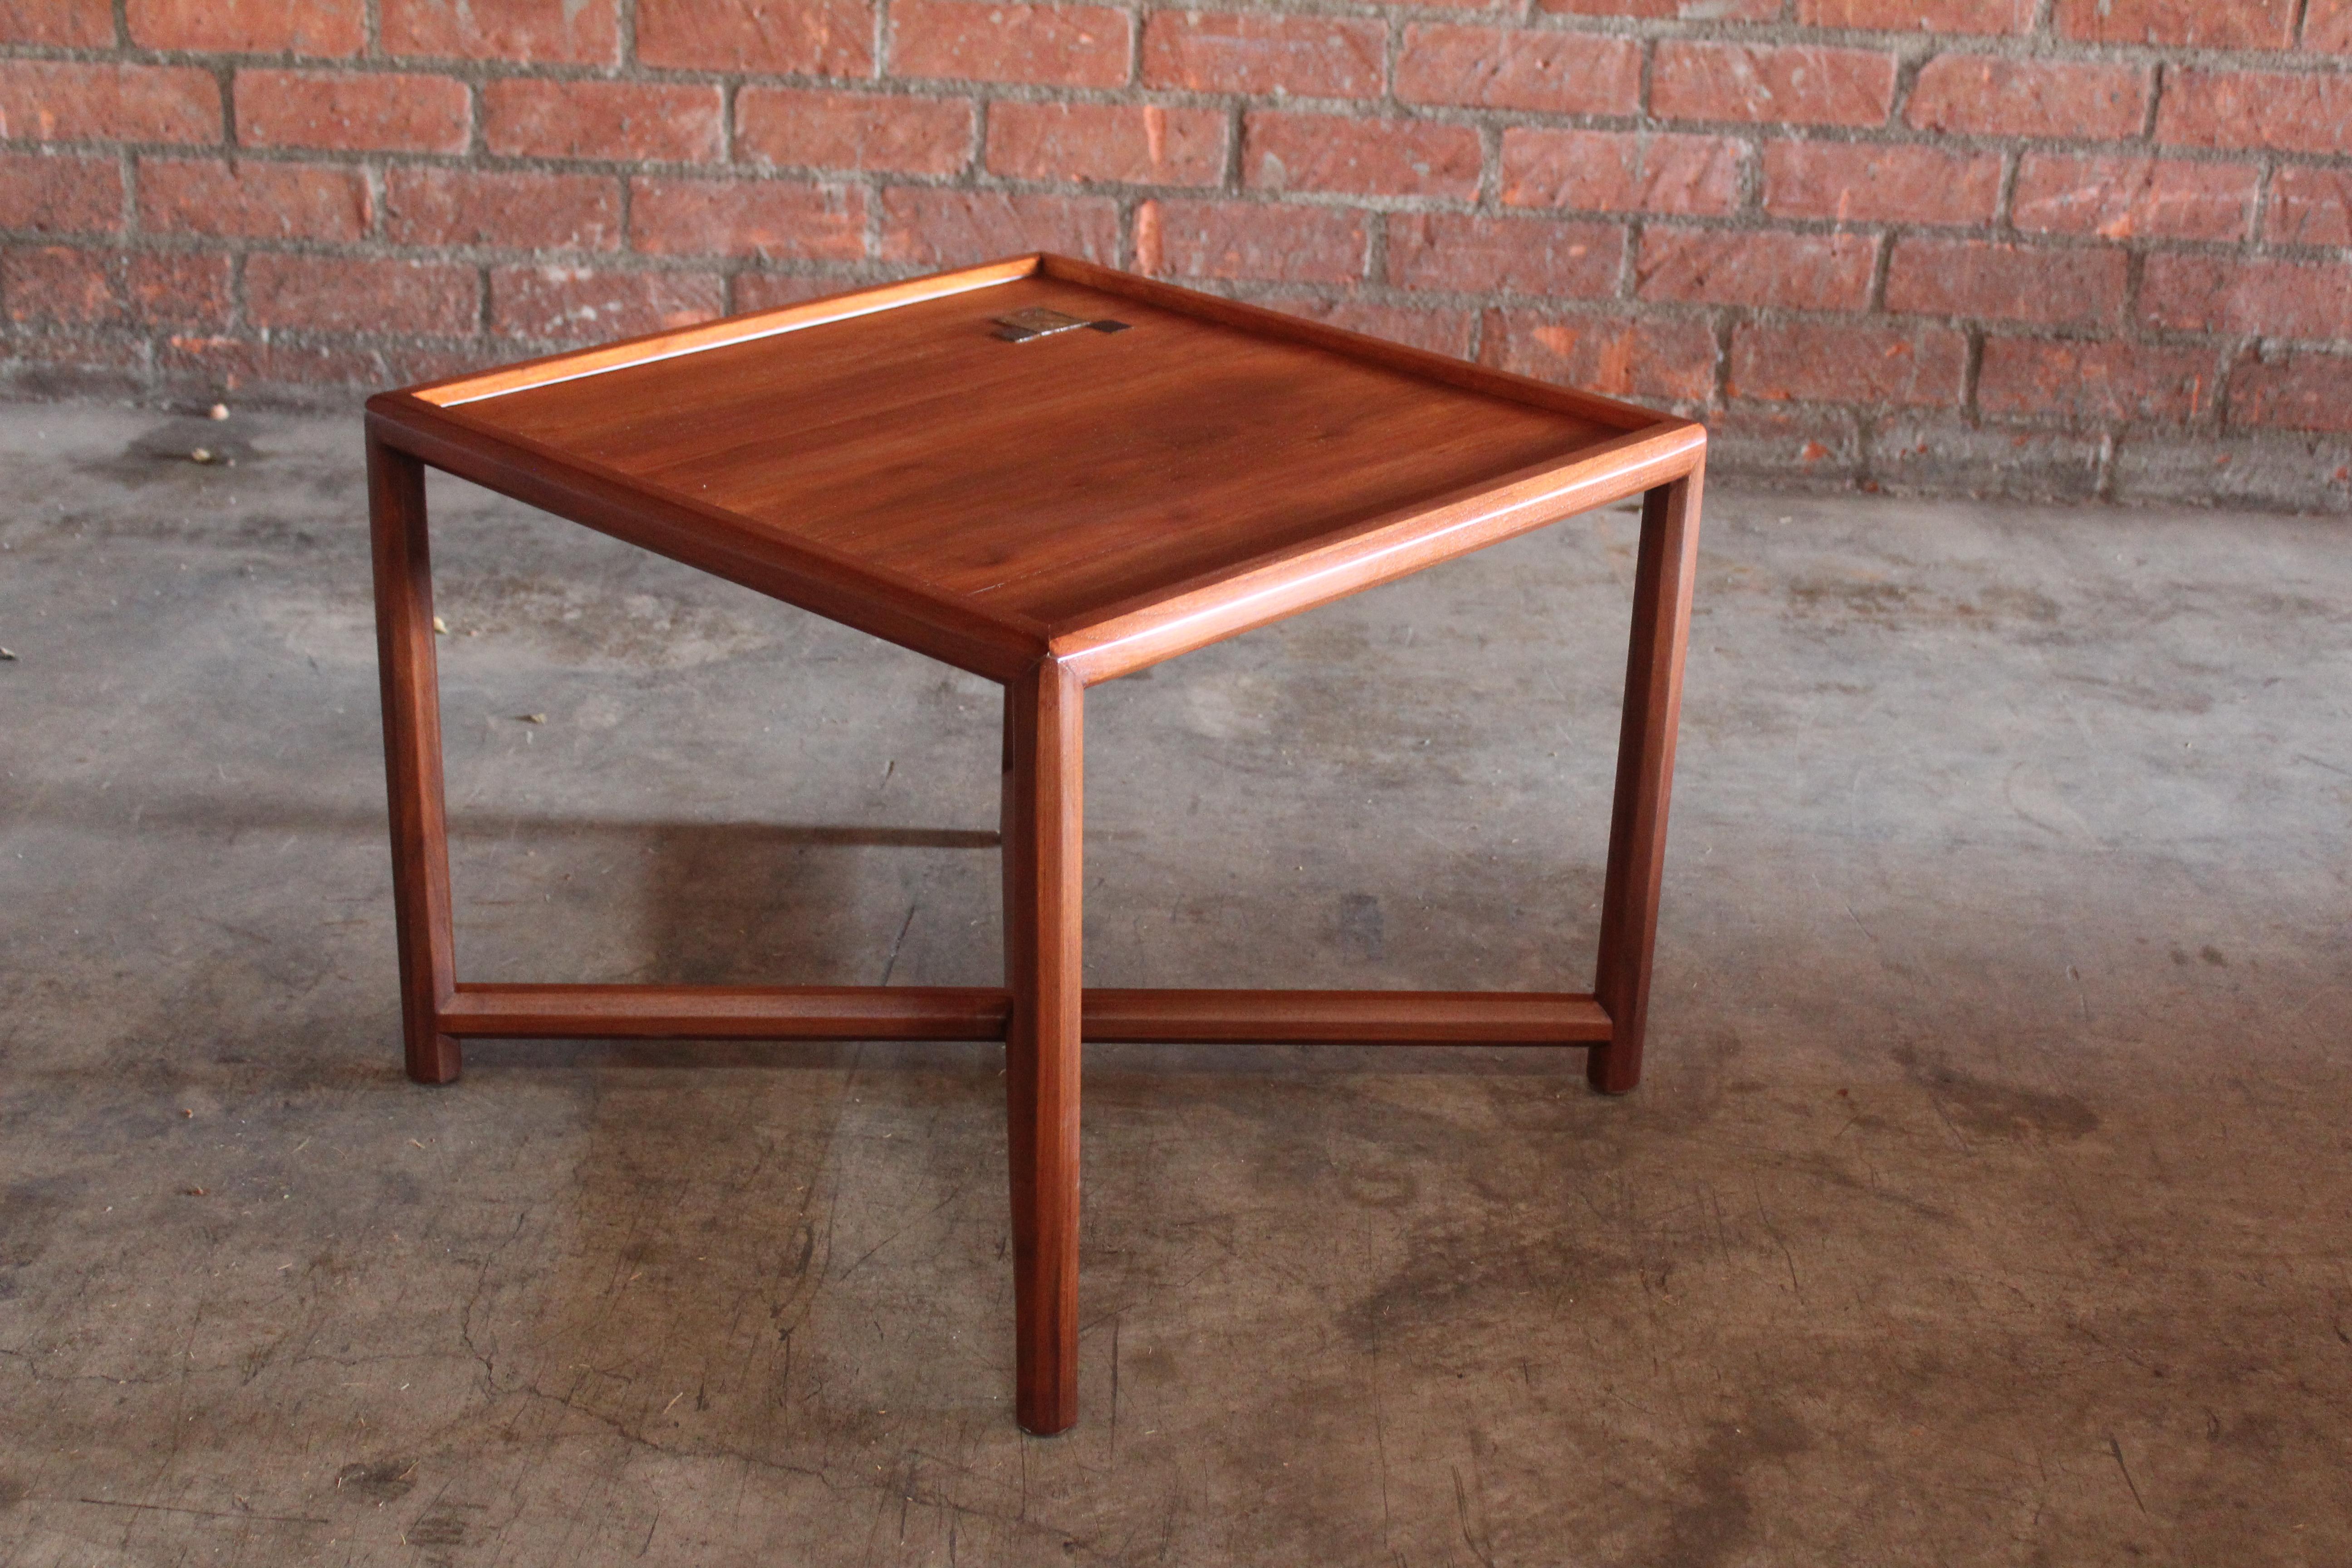 Walnut End Table with Tiffany Tiles by Edward Wormley for Dunbar, 1950s For Sale 3